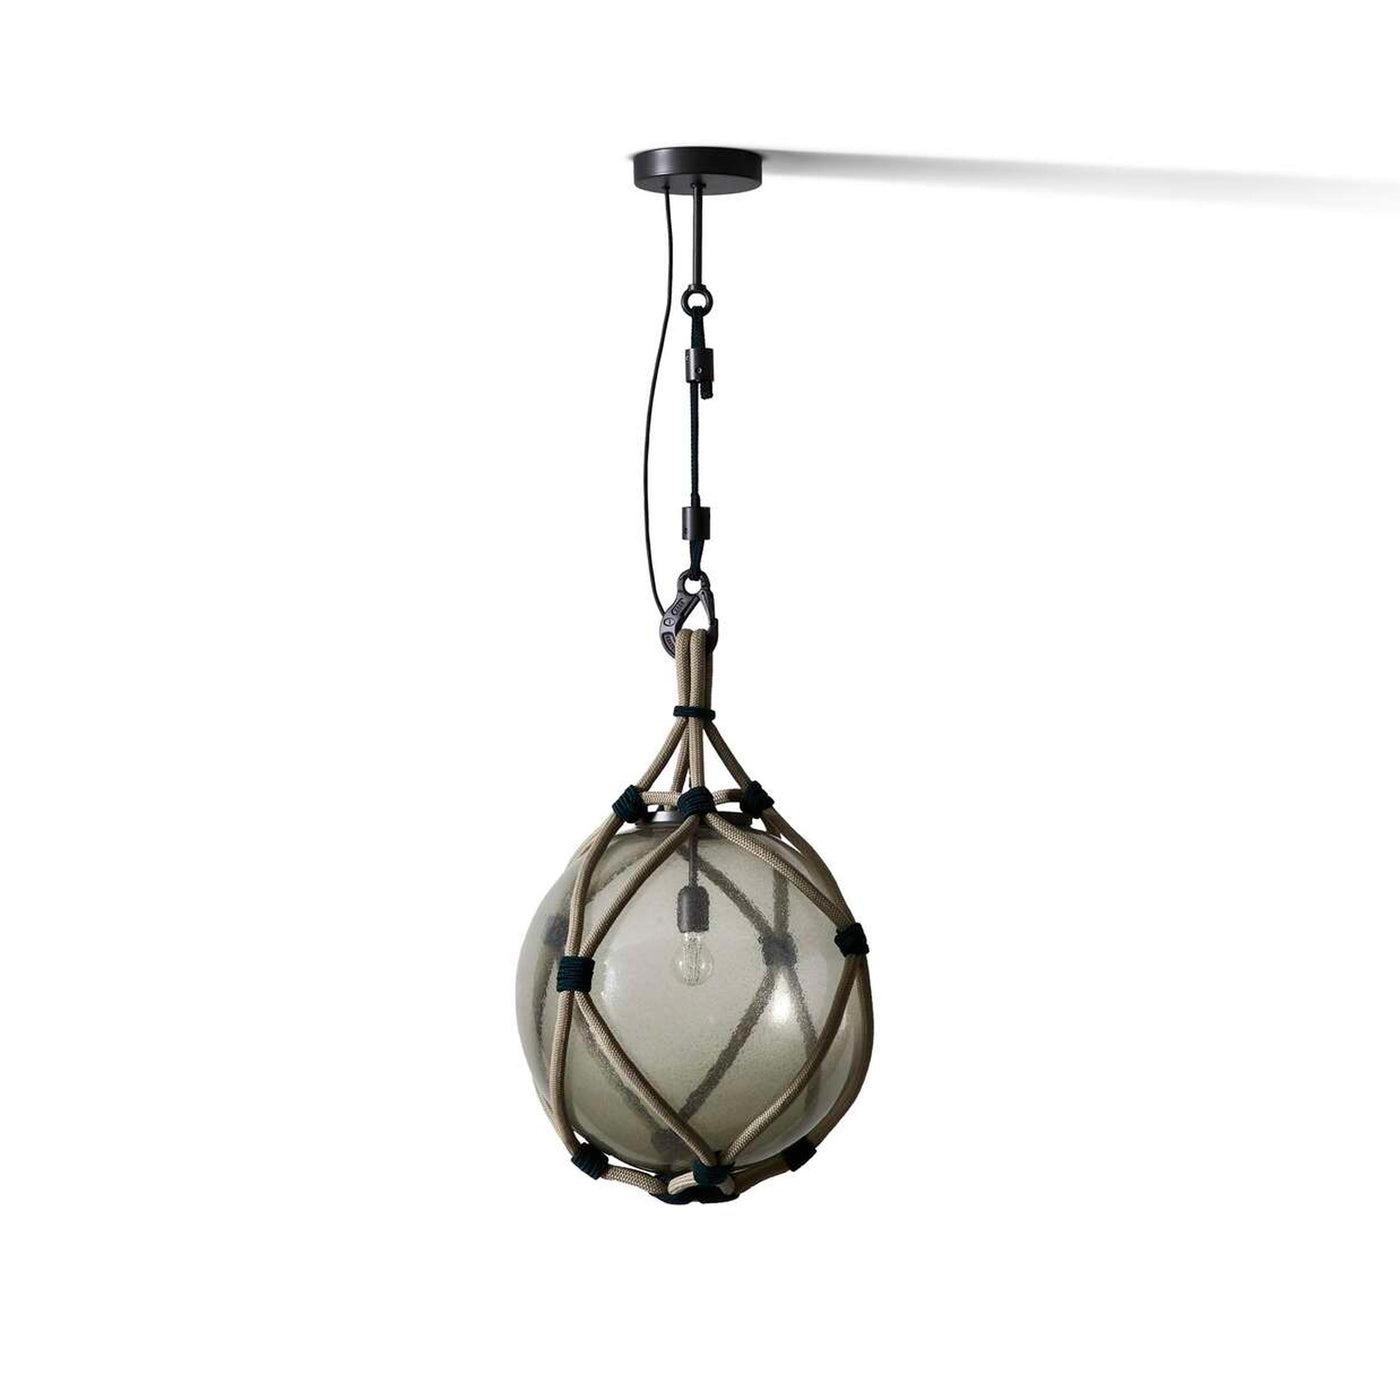 Blown Glass and Rope Outdoor Suspension Lamp BOLLICOSA NAUTILUS, designed by Cassina 02